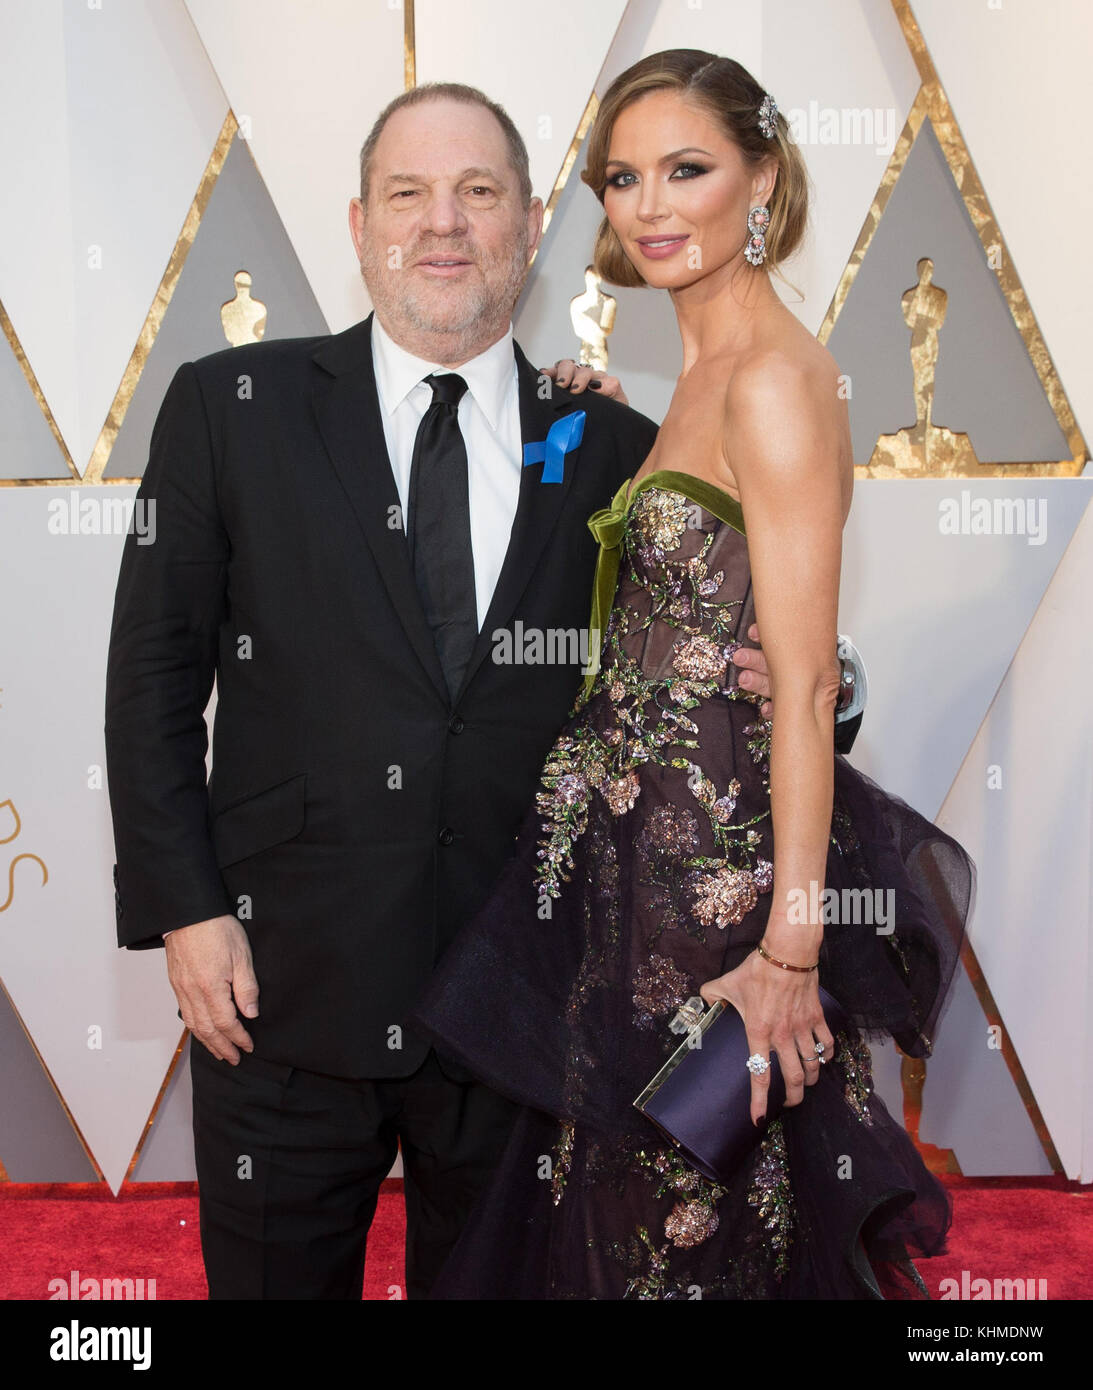 HOLLYWOOD, CA - FEBRUARY 26: Harvey Weinstein attends the 89th Annual Academy Awards at Hollywood & Highland Center on February 26, 2017 in Hollywood, California  People:  Harvey Weinstein  Transmission Ref:  MNC Stock Photo